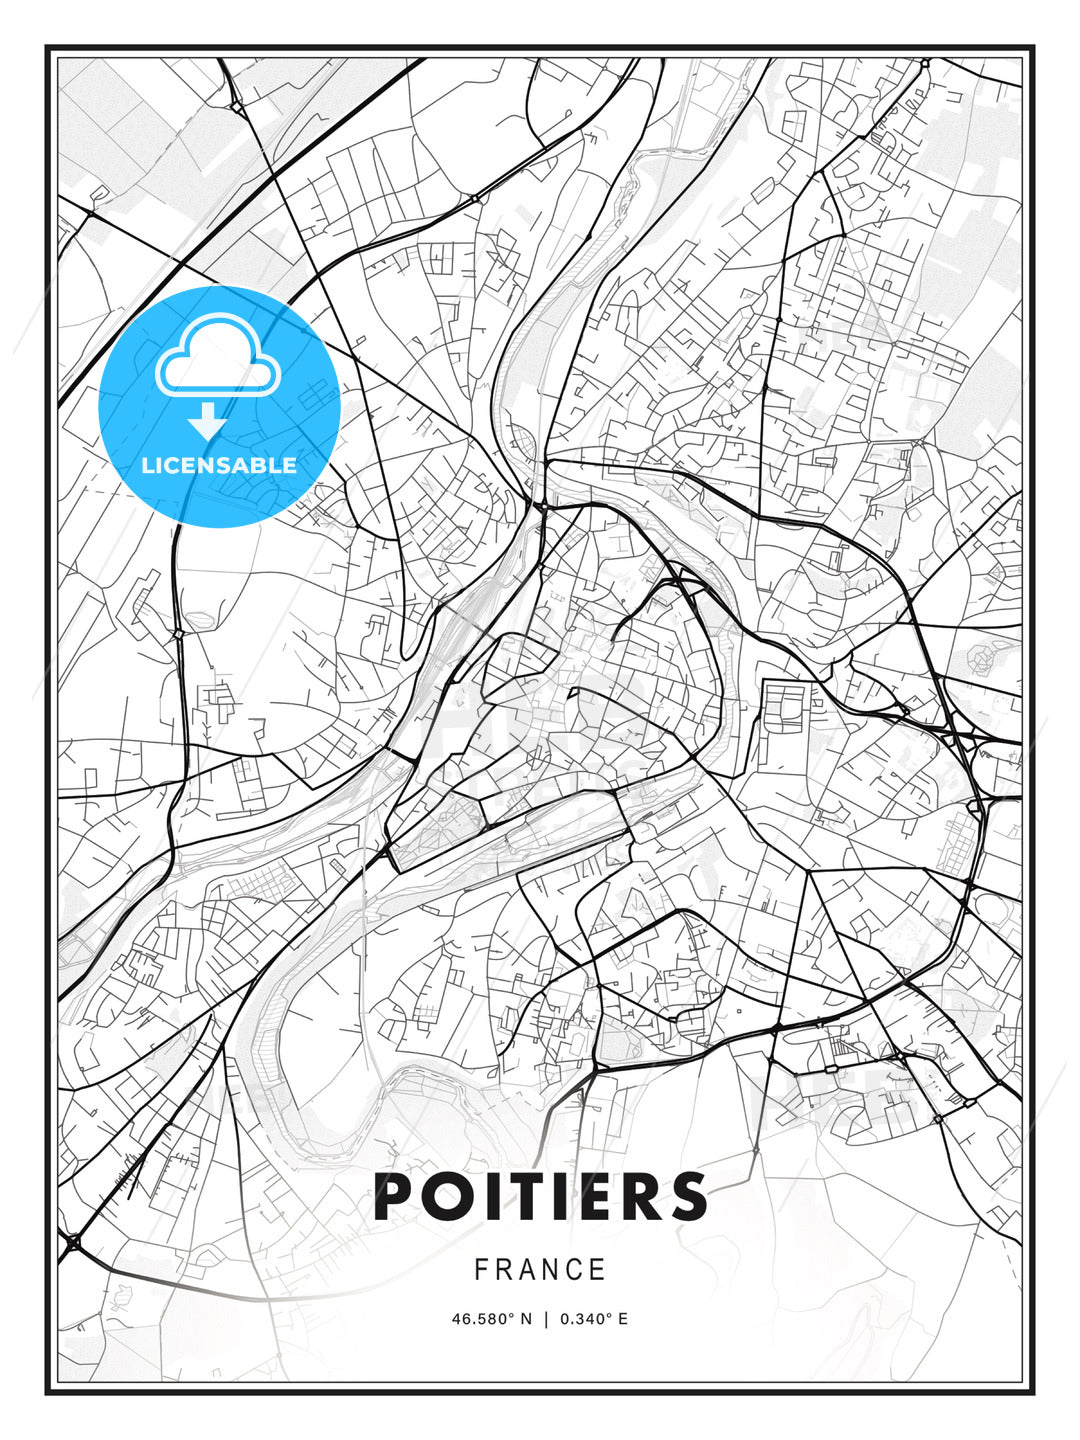 Poitiers, France, Modern Print Template in Various Formats - HEBSTREITS Sketches